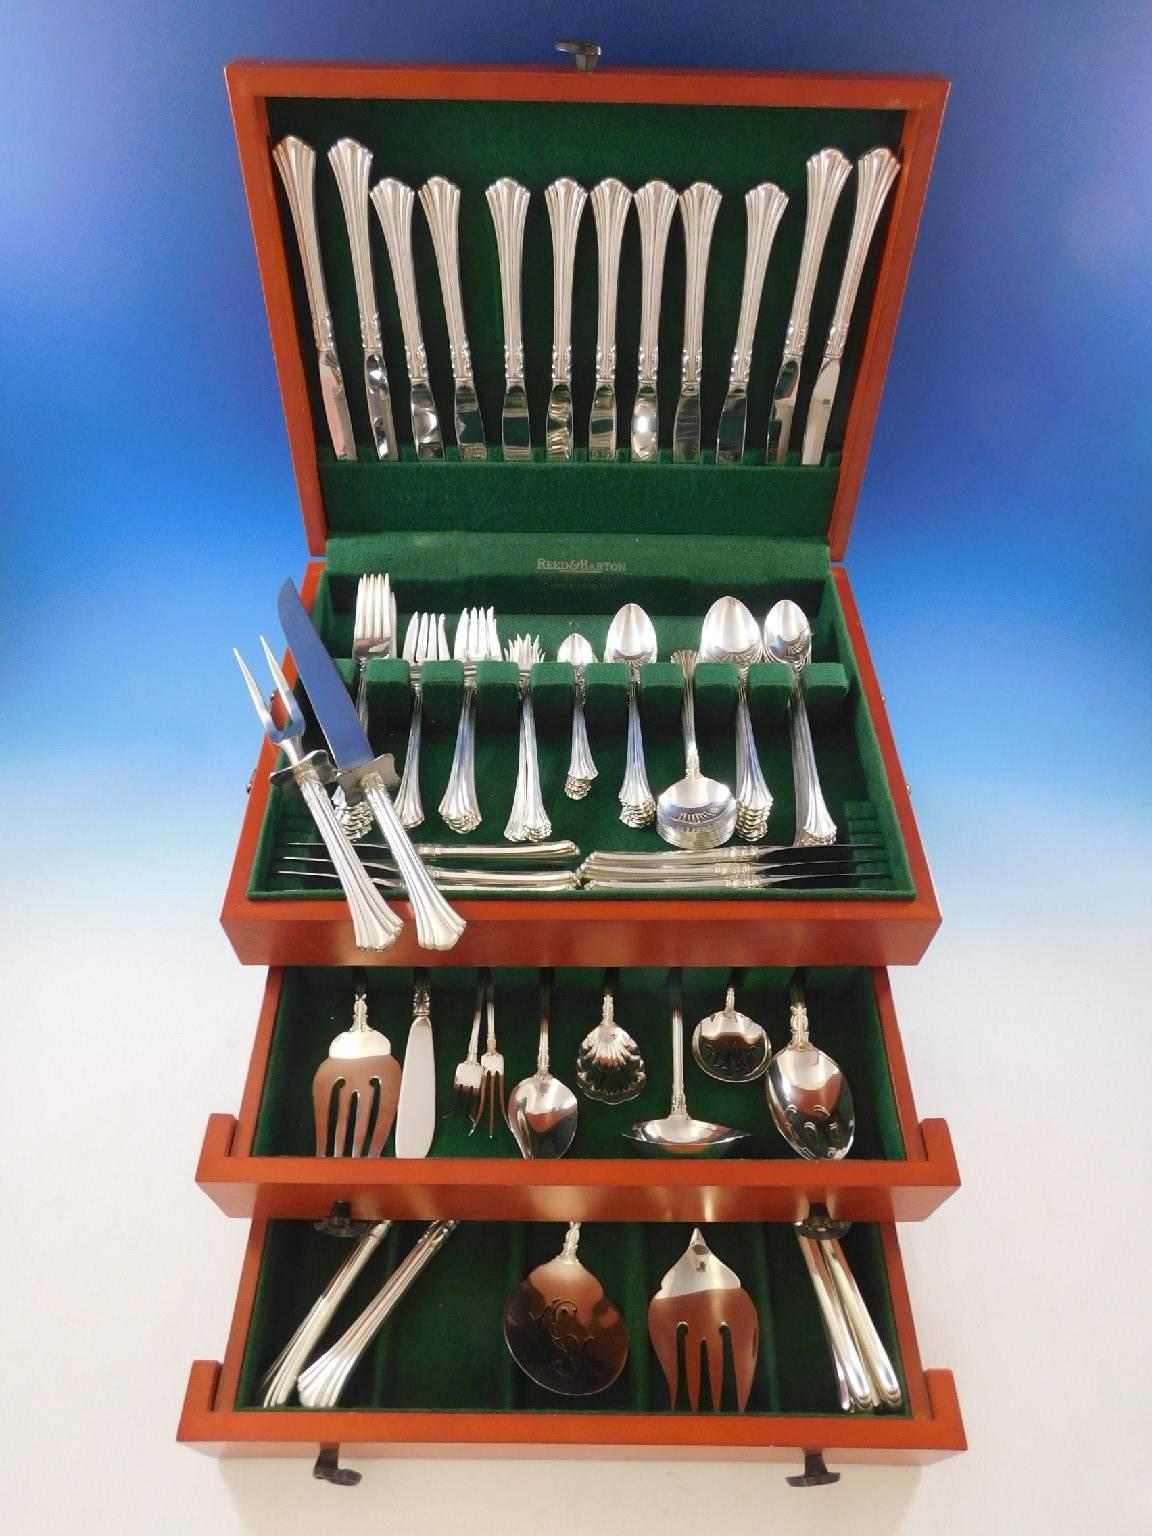 Impressive 18th century by Reed & Barton sterling silver flatware set, 105 pieces. This set includes:

Eight knives, 9